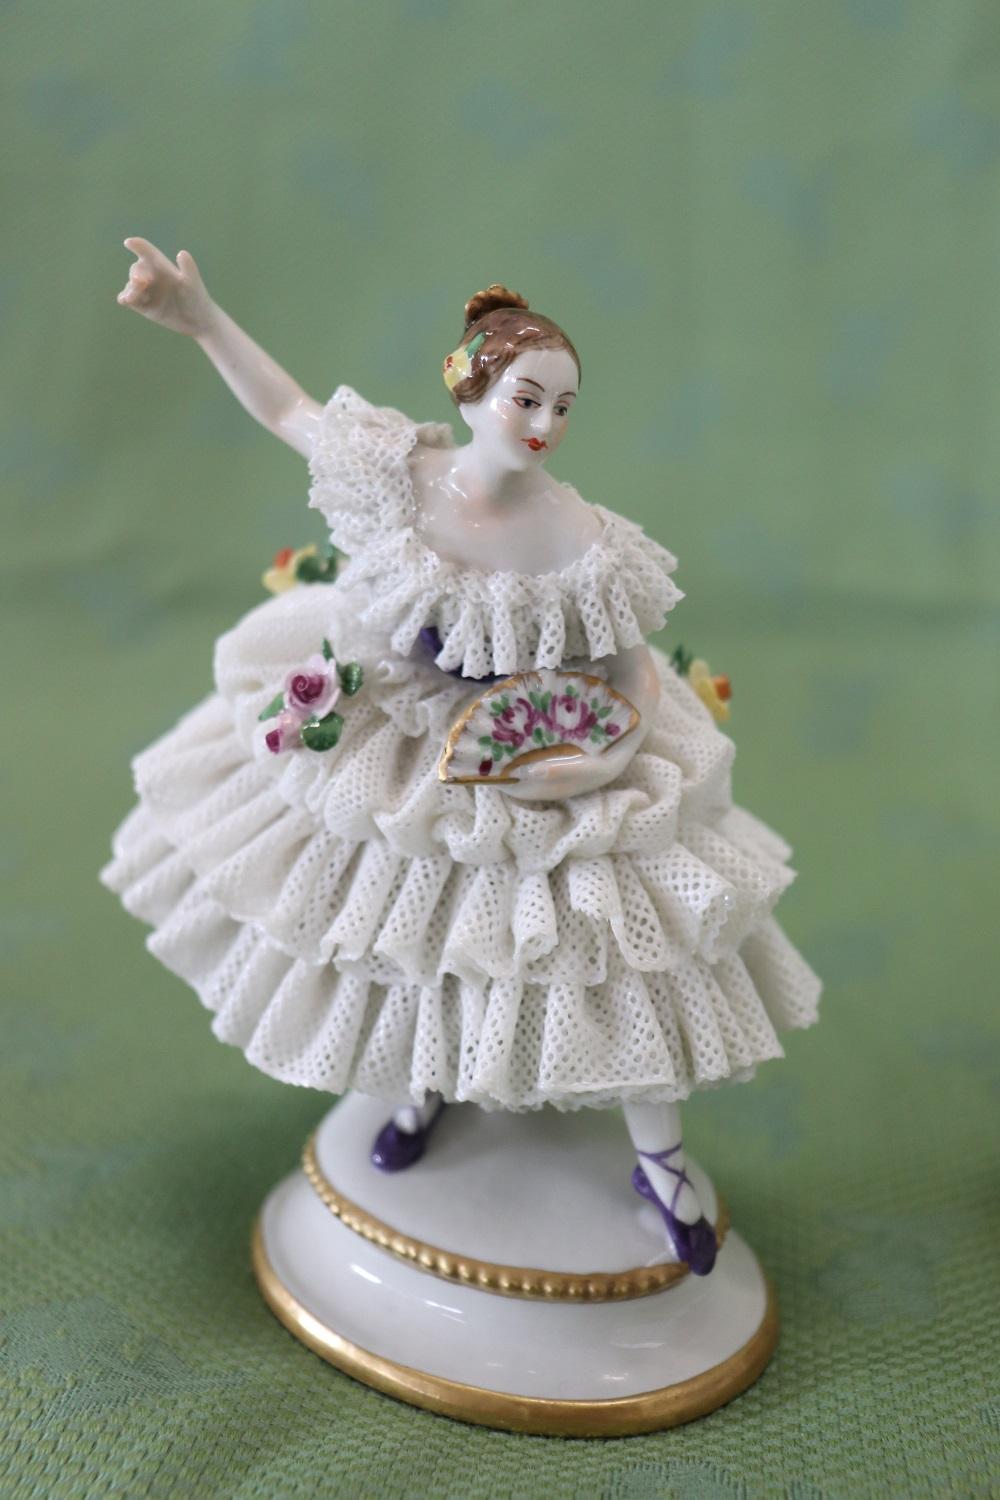 Beautiful pair of statues in refined Capodimonte porcelain. Two young girls dancing. Characterized by elegant eighteenth-century dresses with full lace skirts completely made in porcelain. Note the great skill in making the dress in detail, it seems